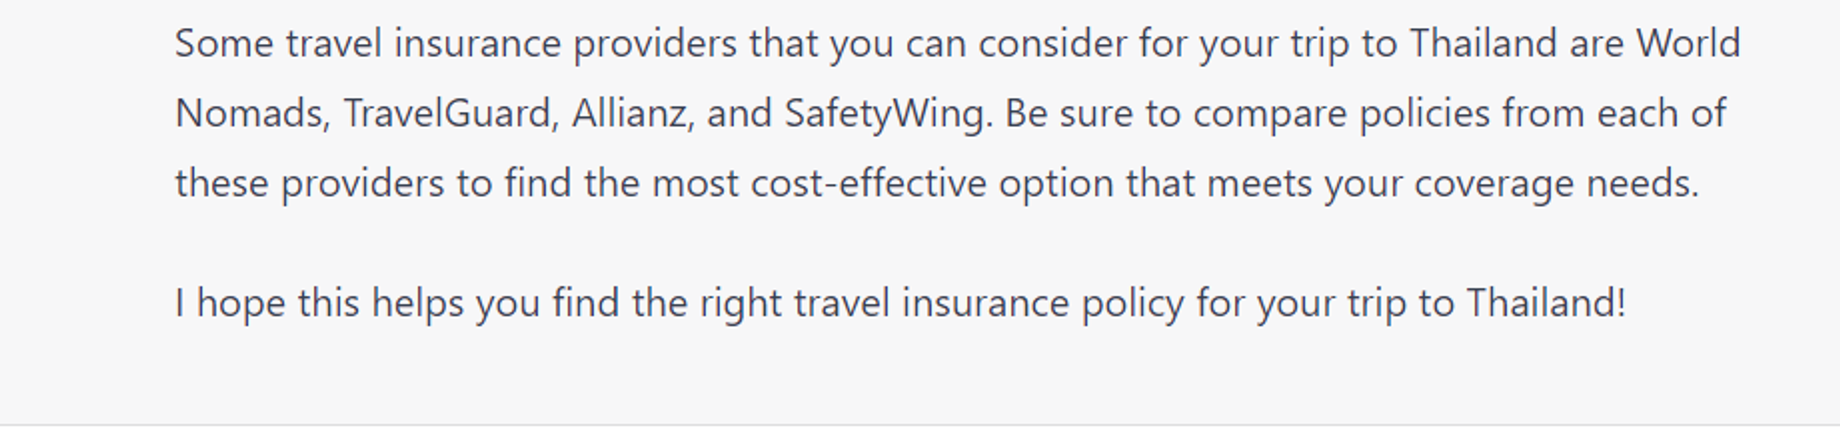  7 Advanced ChatGPT Prompts: Recommend travel insurance